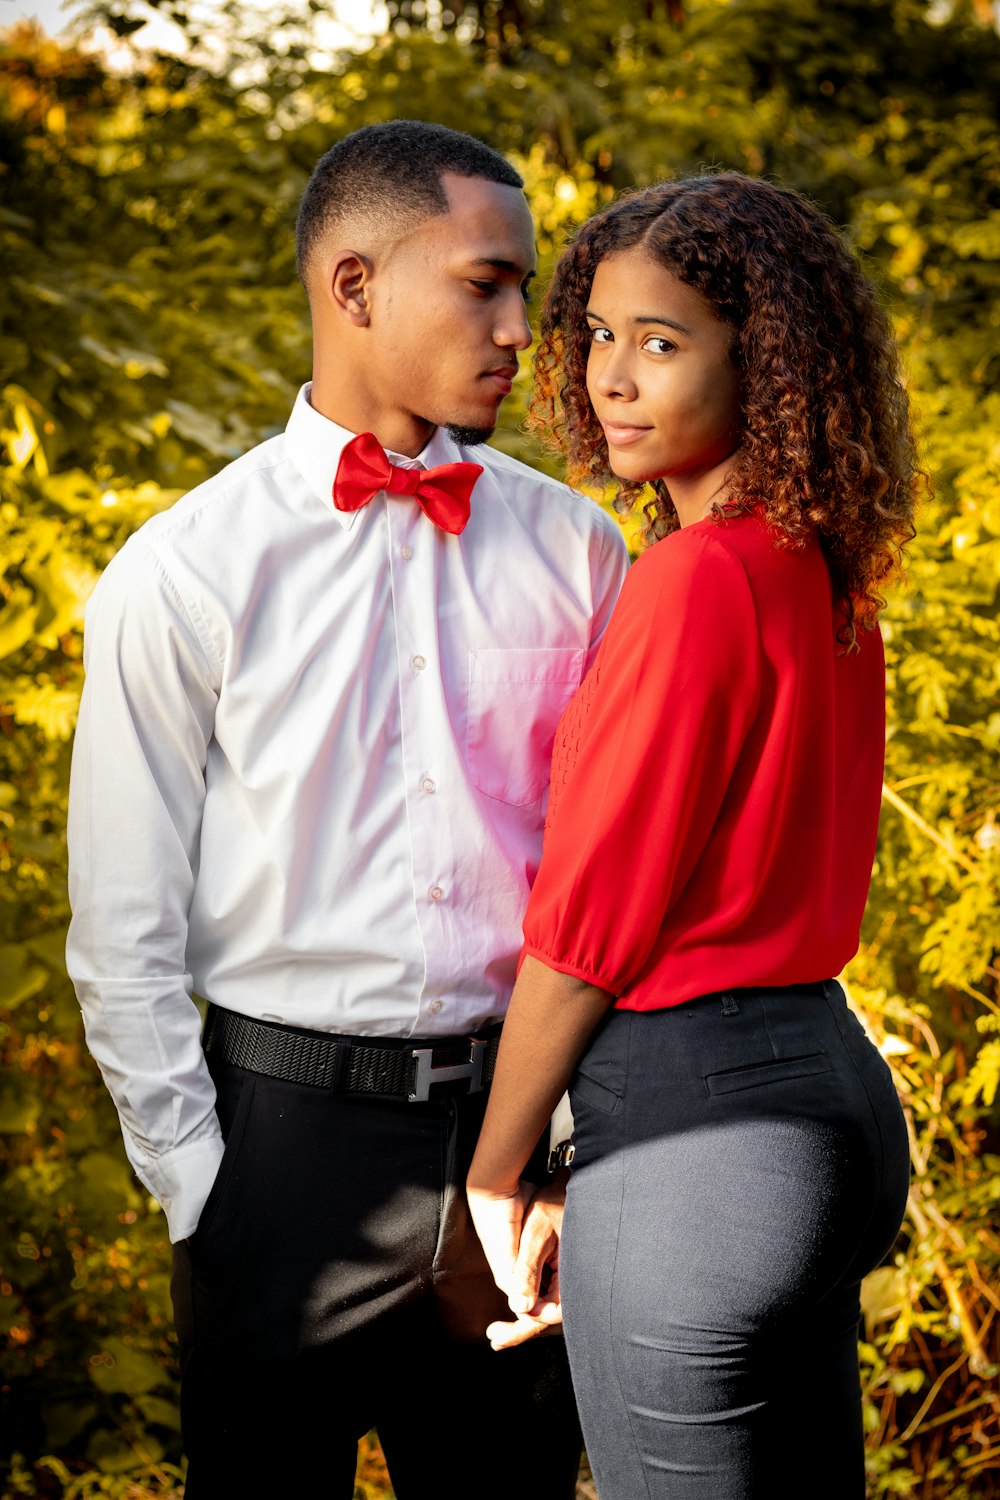 Woman in red long sleeve shirt and gray pants standing beside woman in  white dress shirt photo – Free Accessory Image on Unsplash